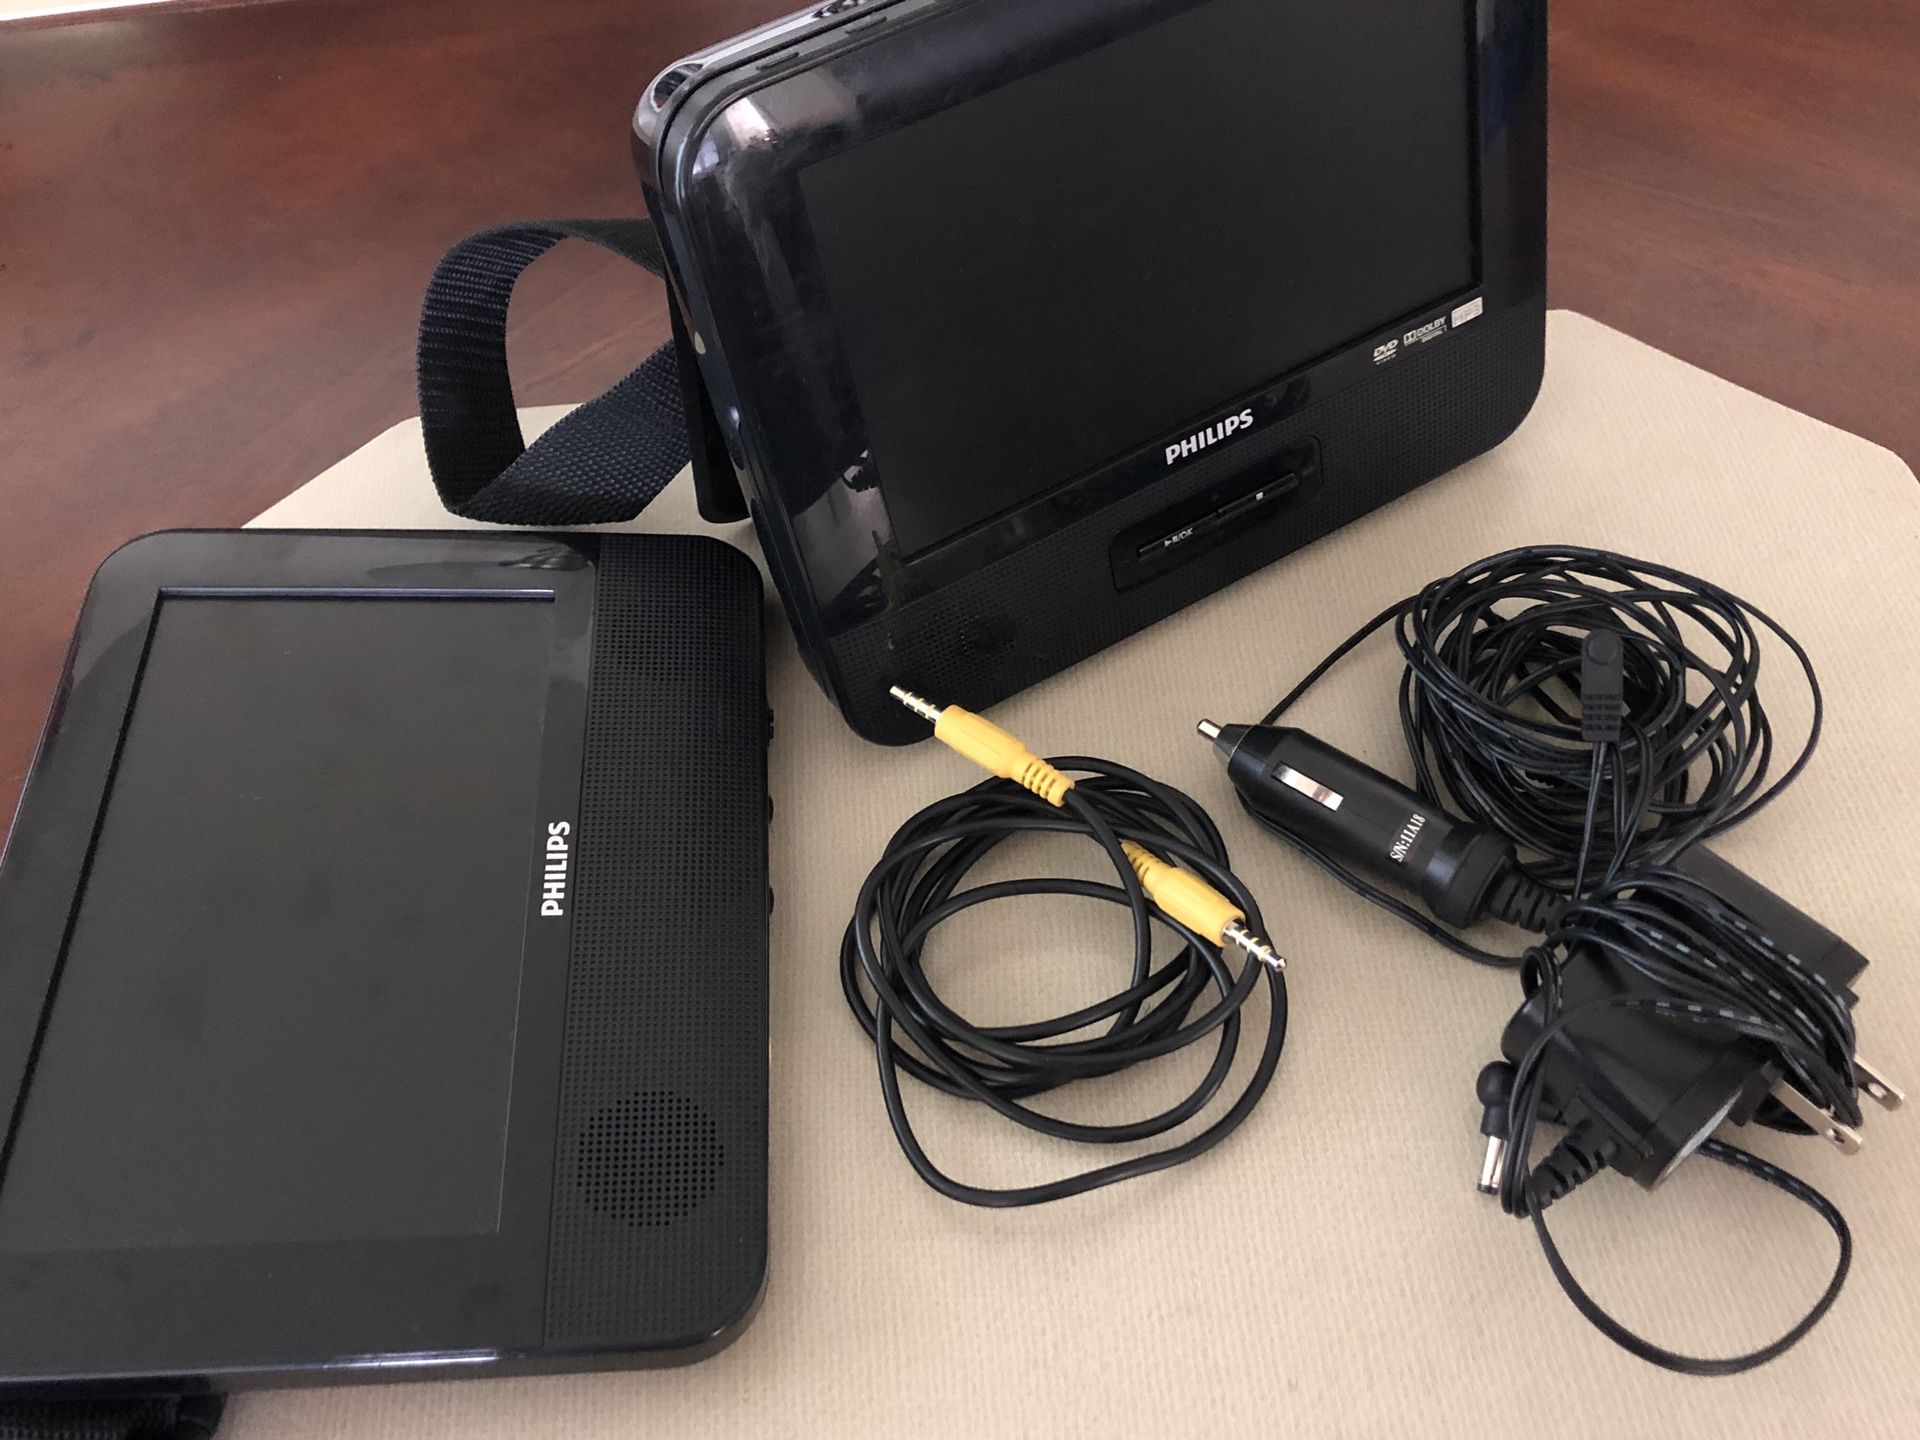 Phillips Dual Portable DVD Player